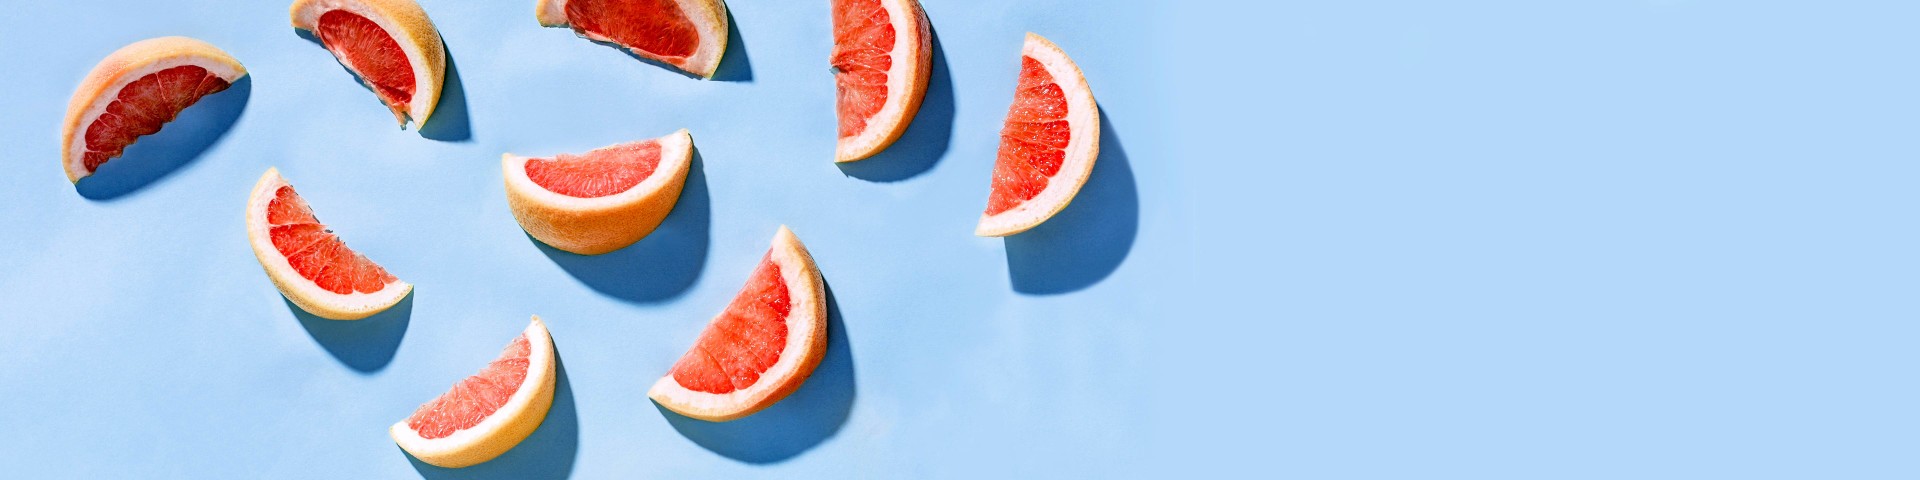 Learn about vitamin C and why you probably get plenty through your diet.